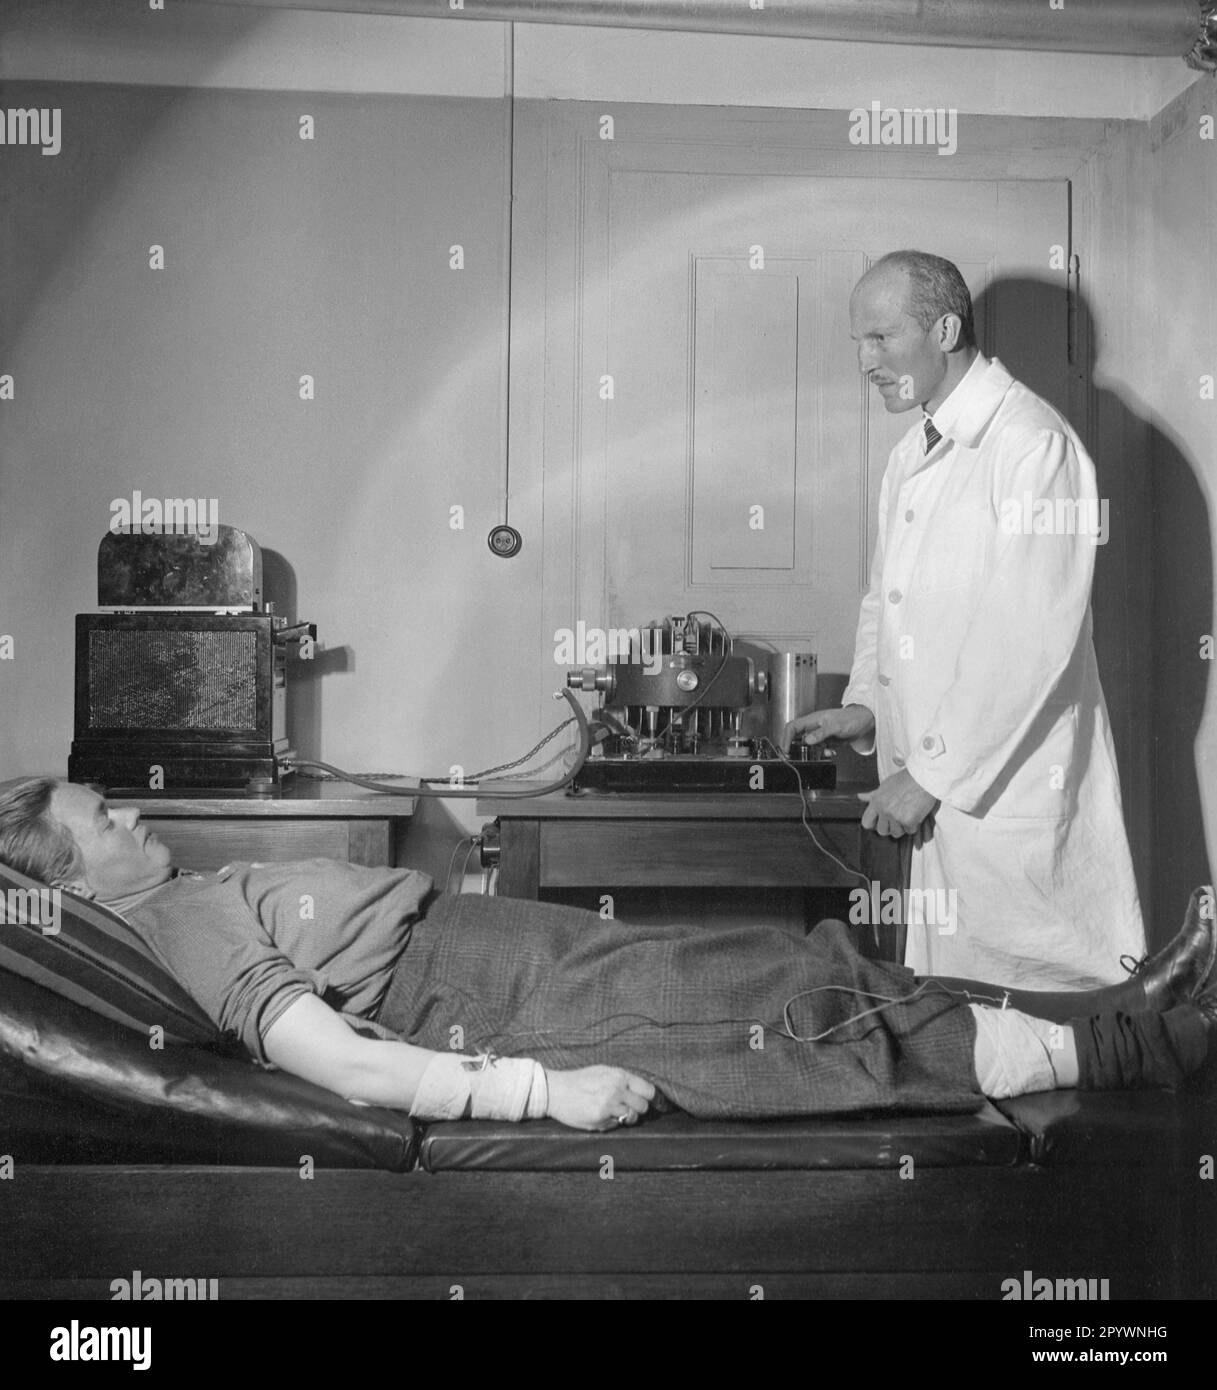 A doctor is treating a patient. Undated photo. Stock Photo